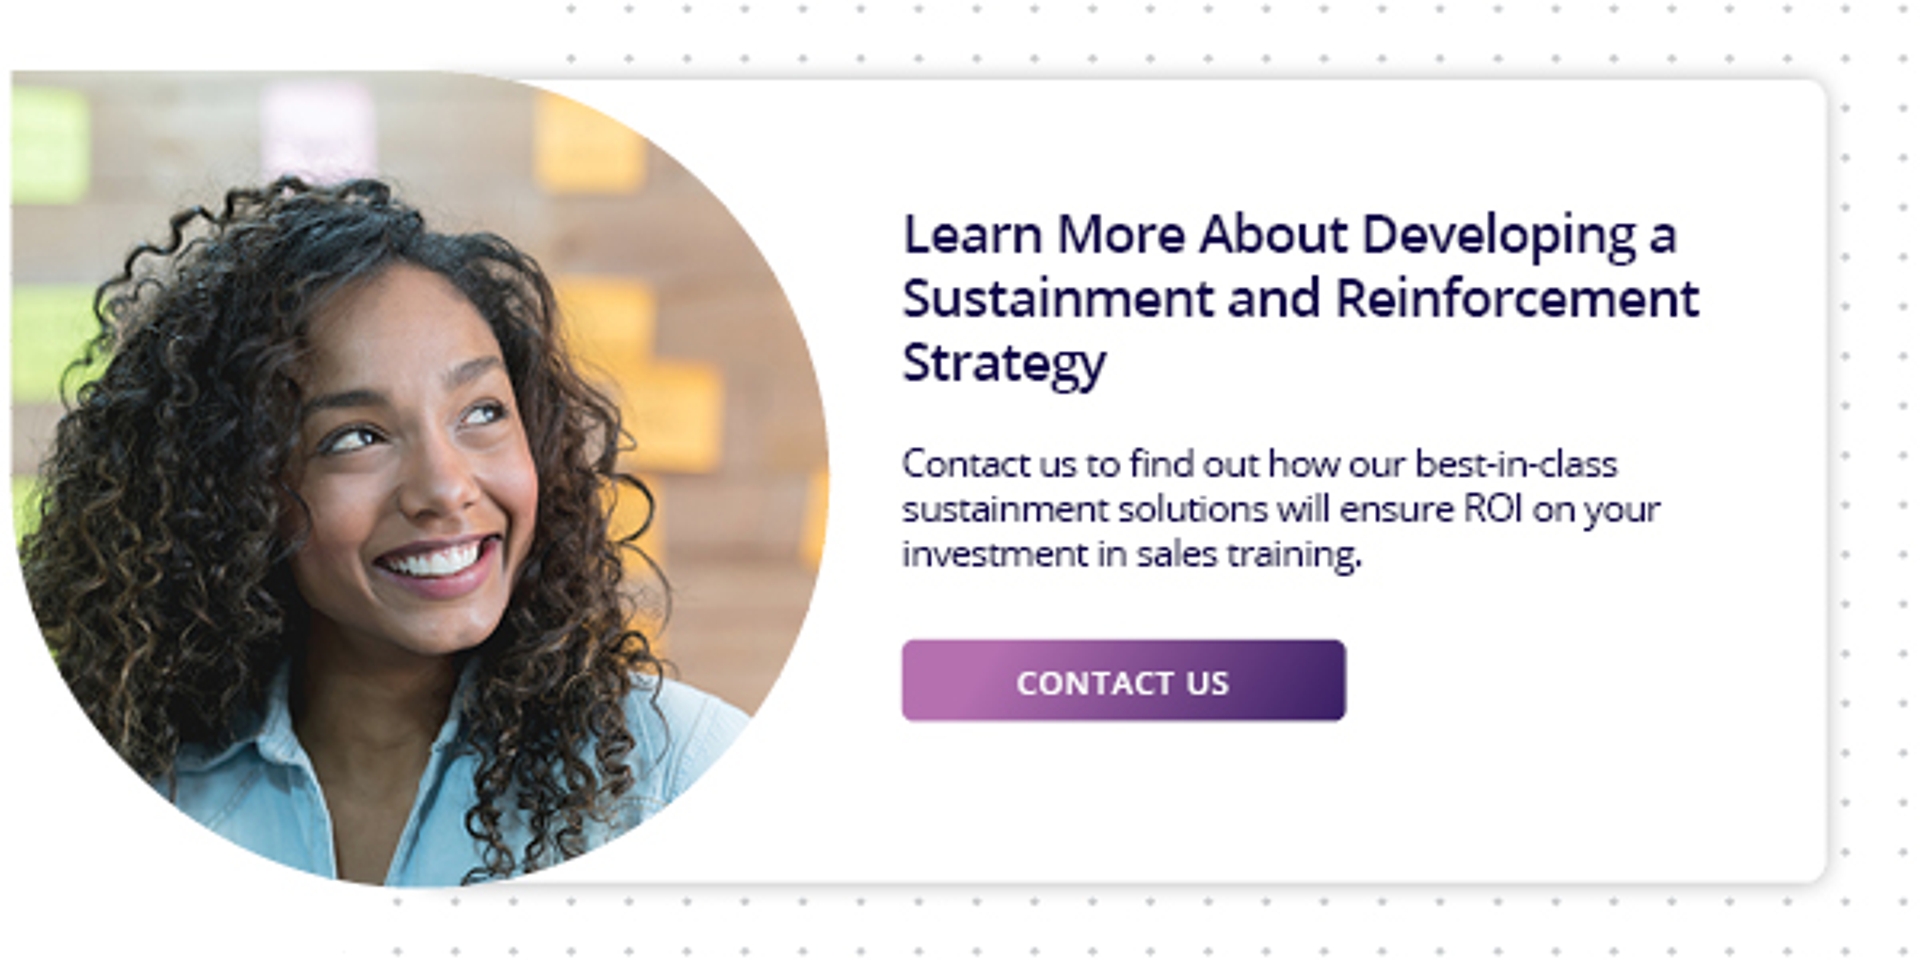 click here to contact richardson to learn about sales training sustainment solutions